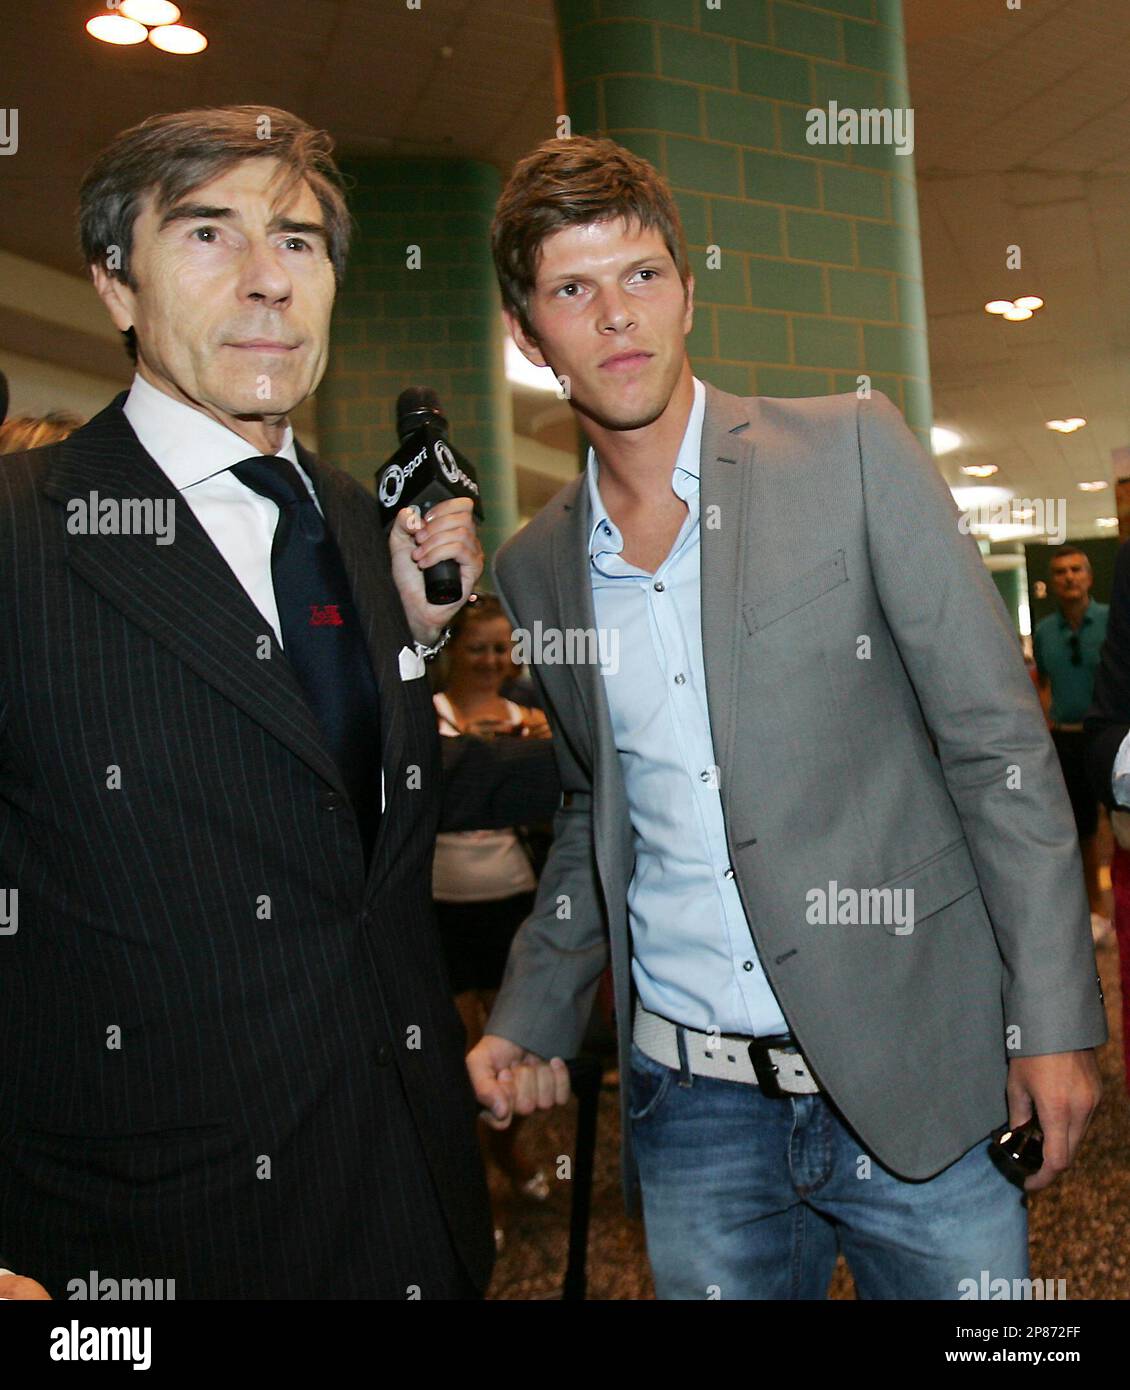 Klaas-Jan Huntelaar of the Netherlands is accompanied by AC Milan general  manager Ariedo Braida upon his arrival at the Milan Malpensa airport, near  Varese, northern Italy, Thursday, Aug 6, 2009. AC Milan